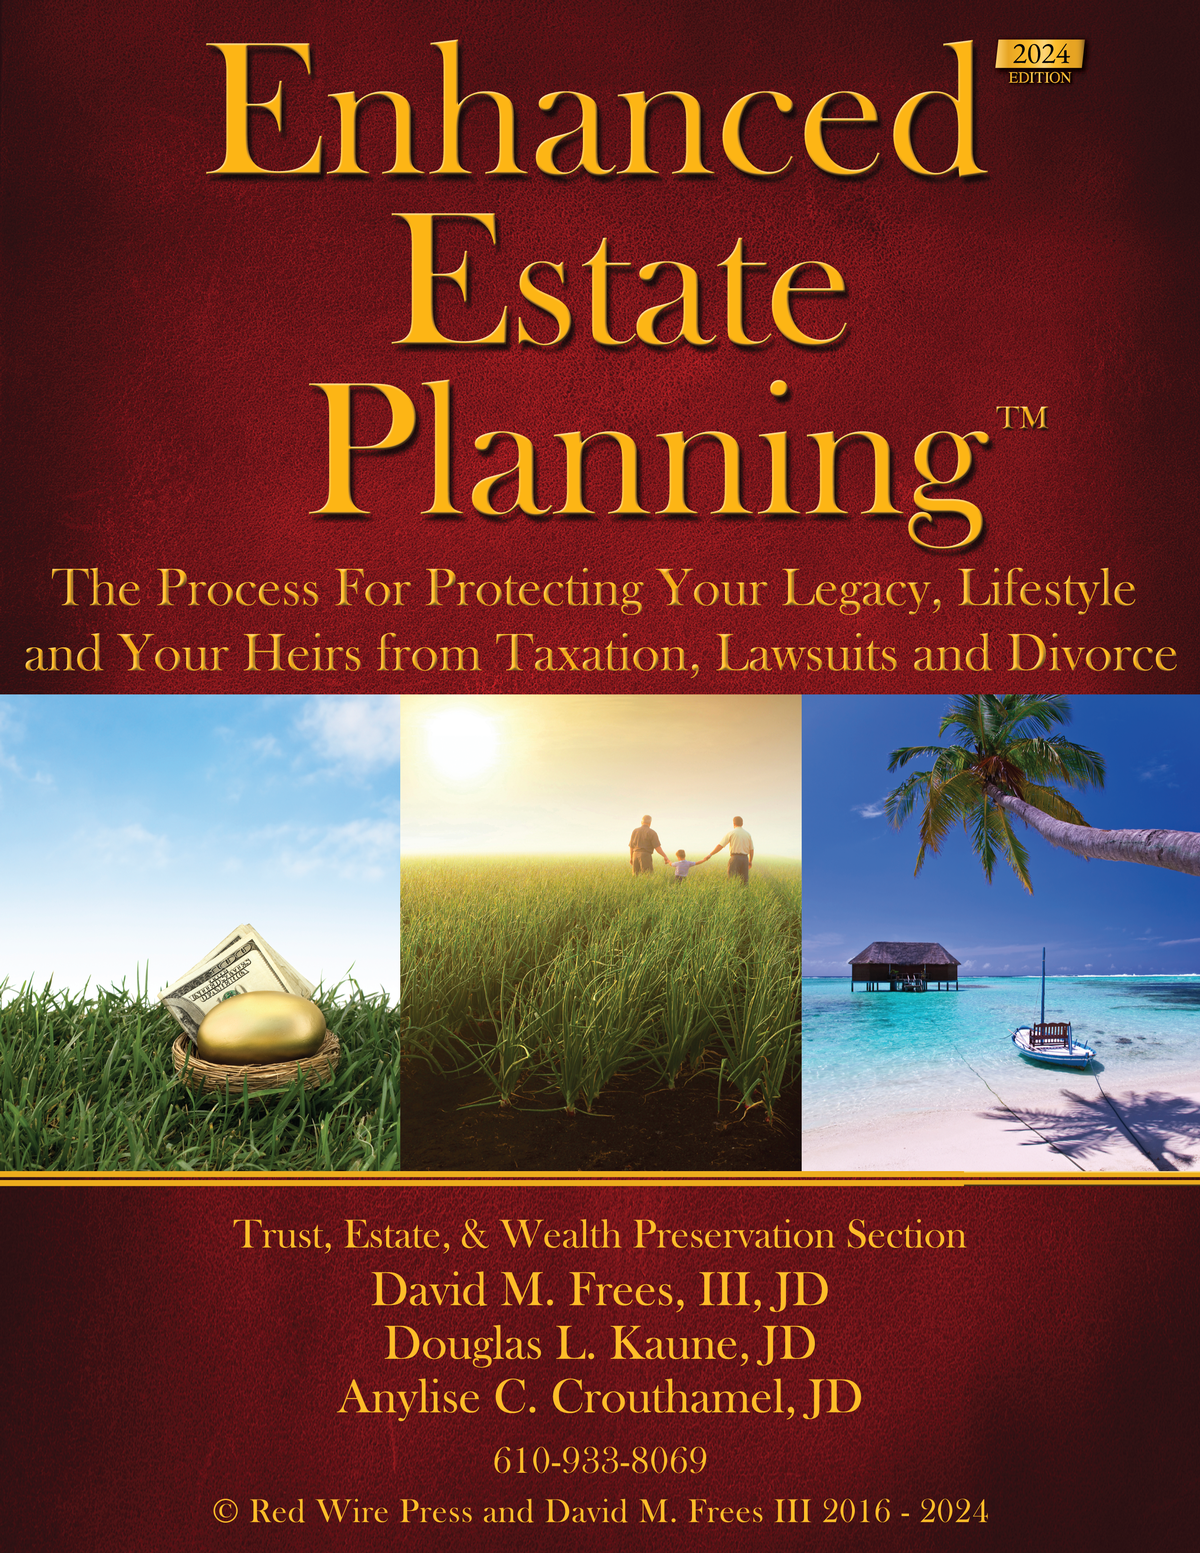 Enhanced Estate Planning: Protecting Your Legacy 2024 Edition